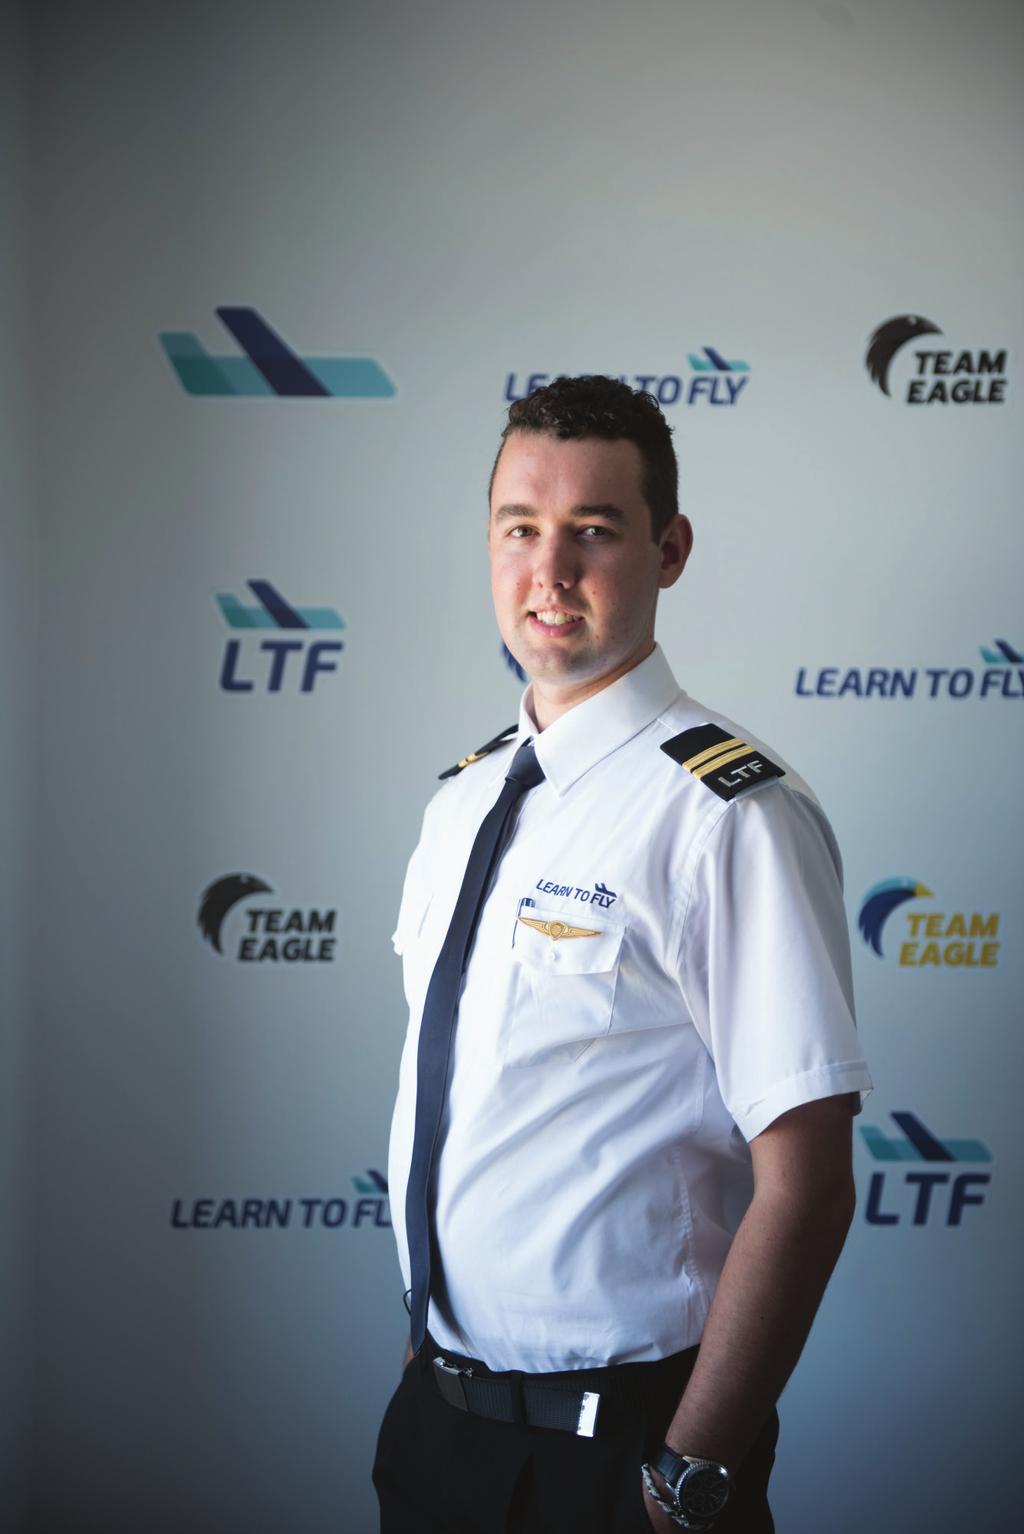 #TheSkyIsCalling PREPARE TO BECOME A PROFESSIONAL PILOT Obtaining a Commercial Pilot Licence (CPL) is your cket to an aviaon career, as it will allow you to take on paid flying work as a